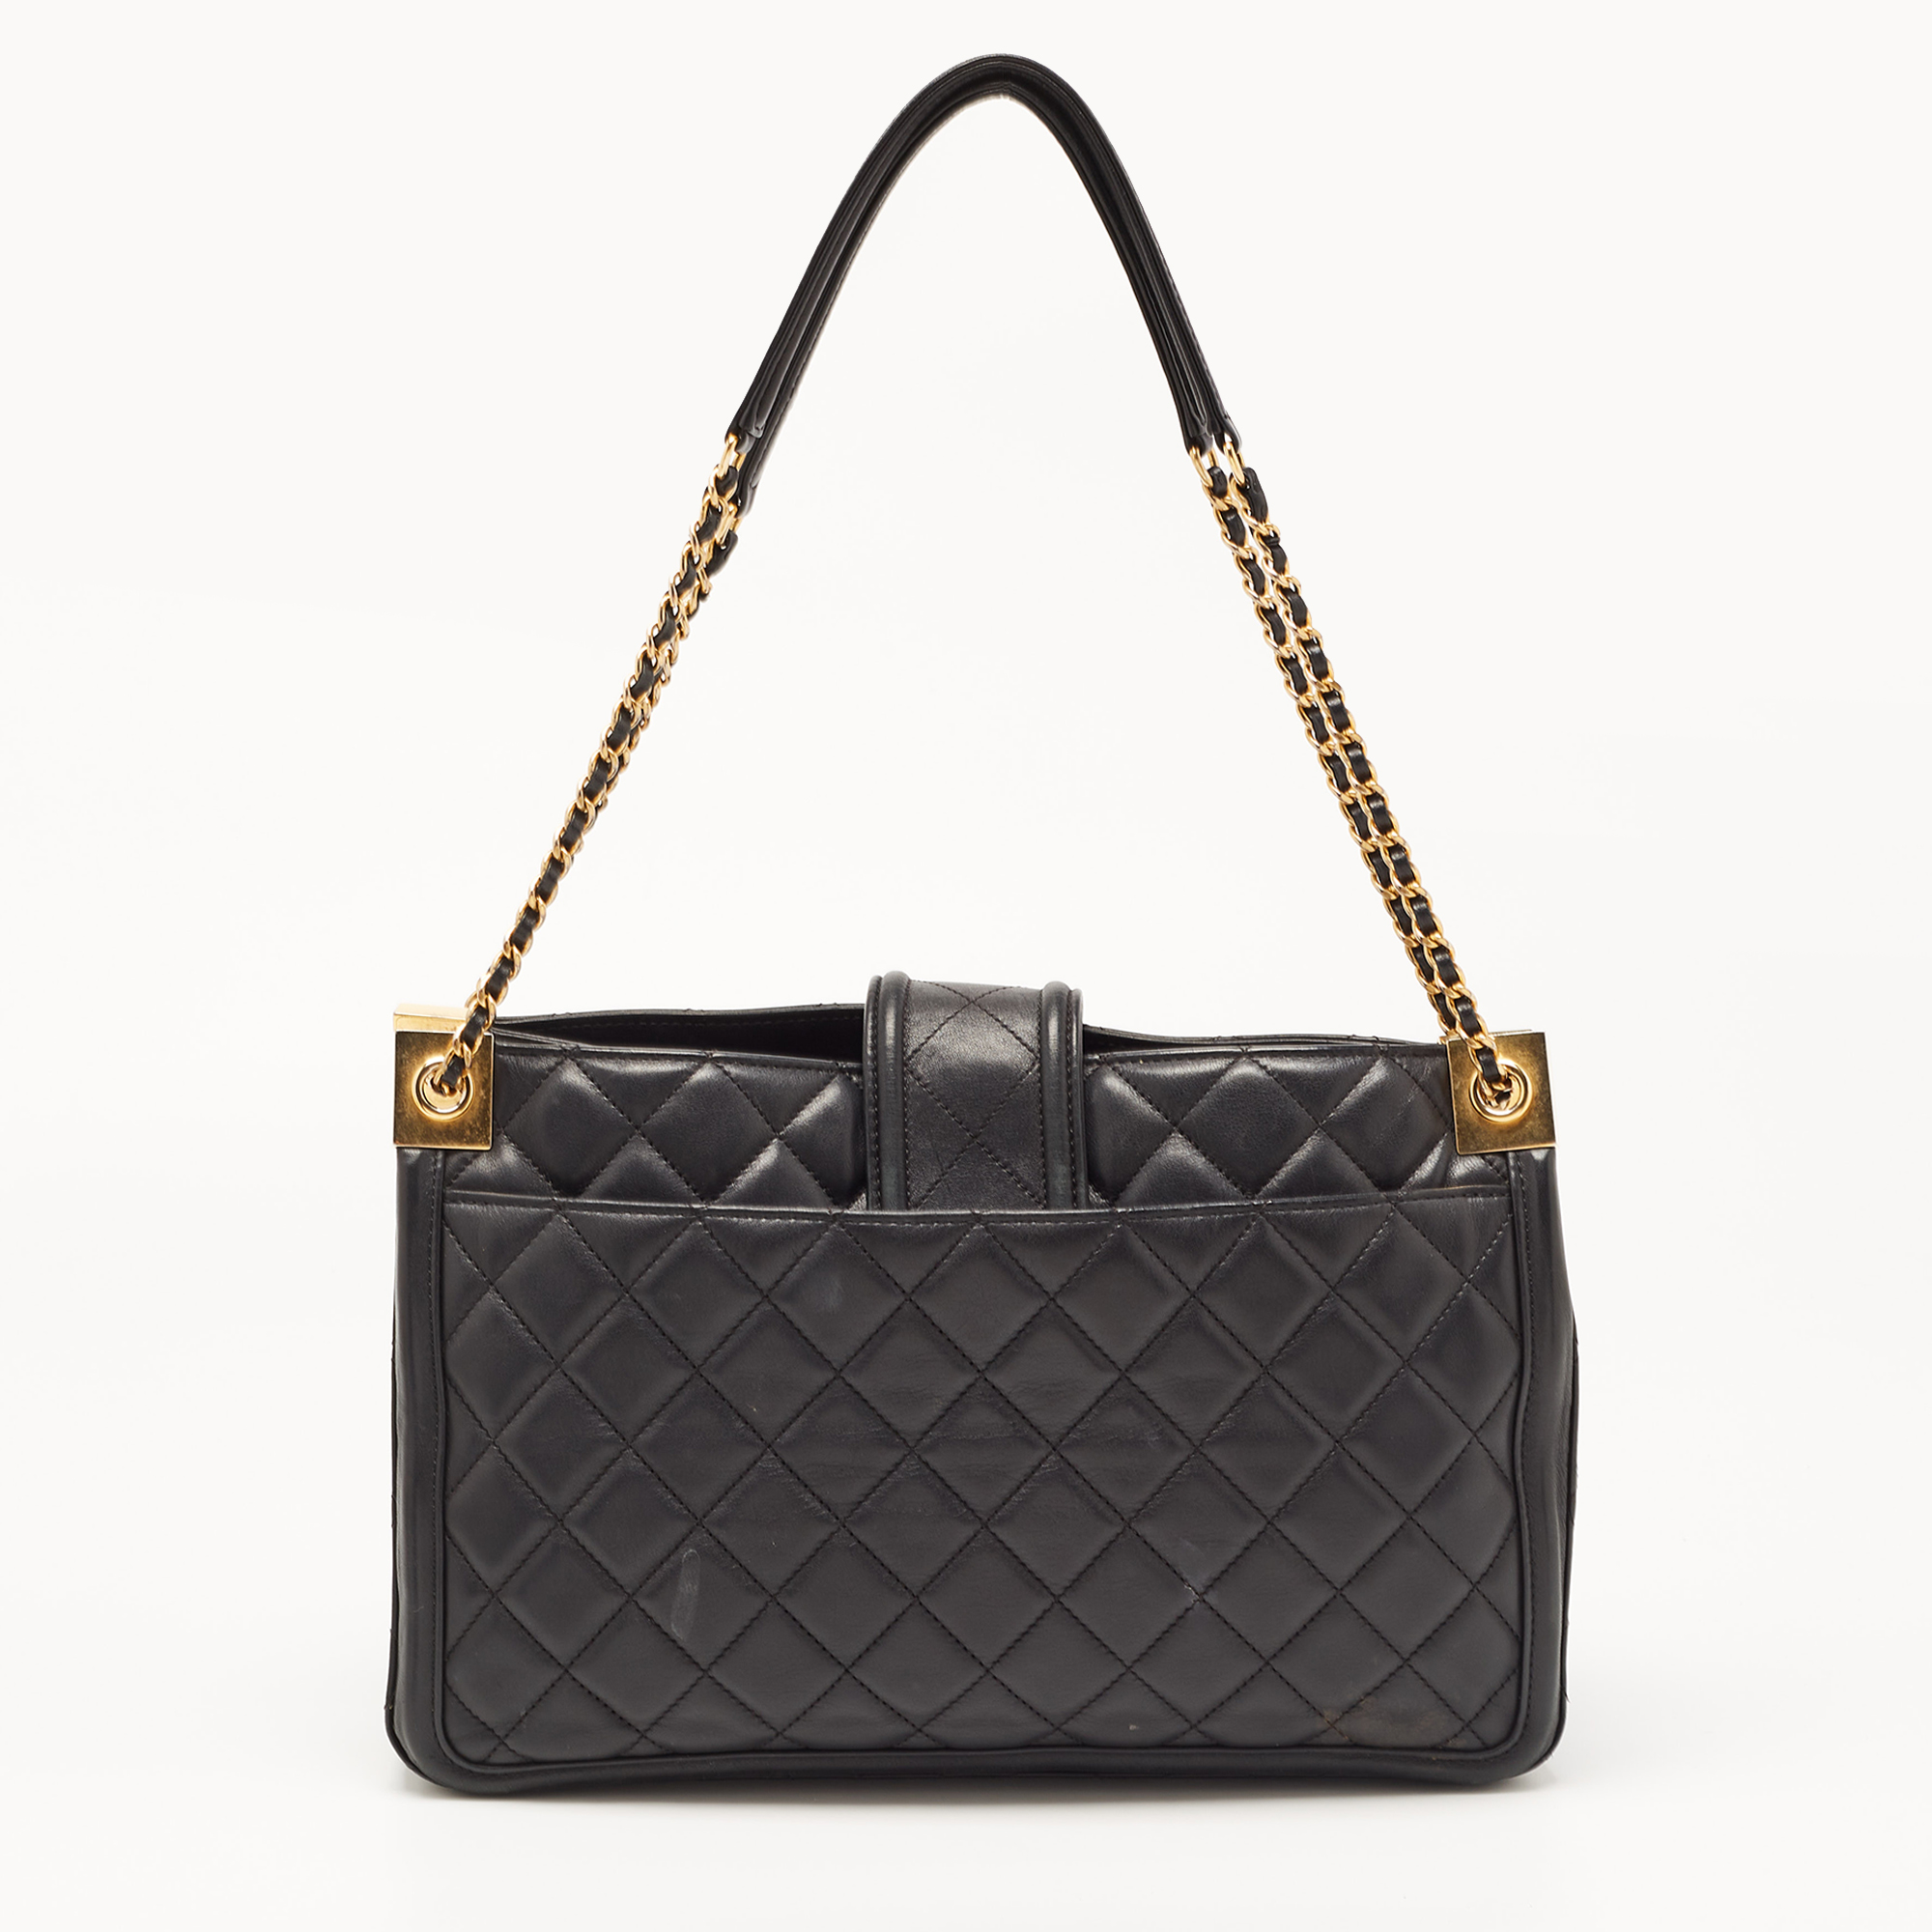 Chanel Black Quilted Leather Elegant Tote